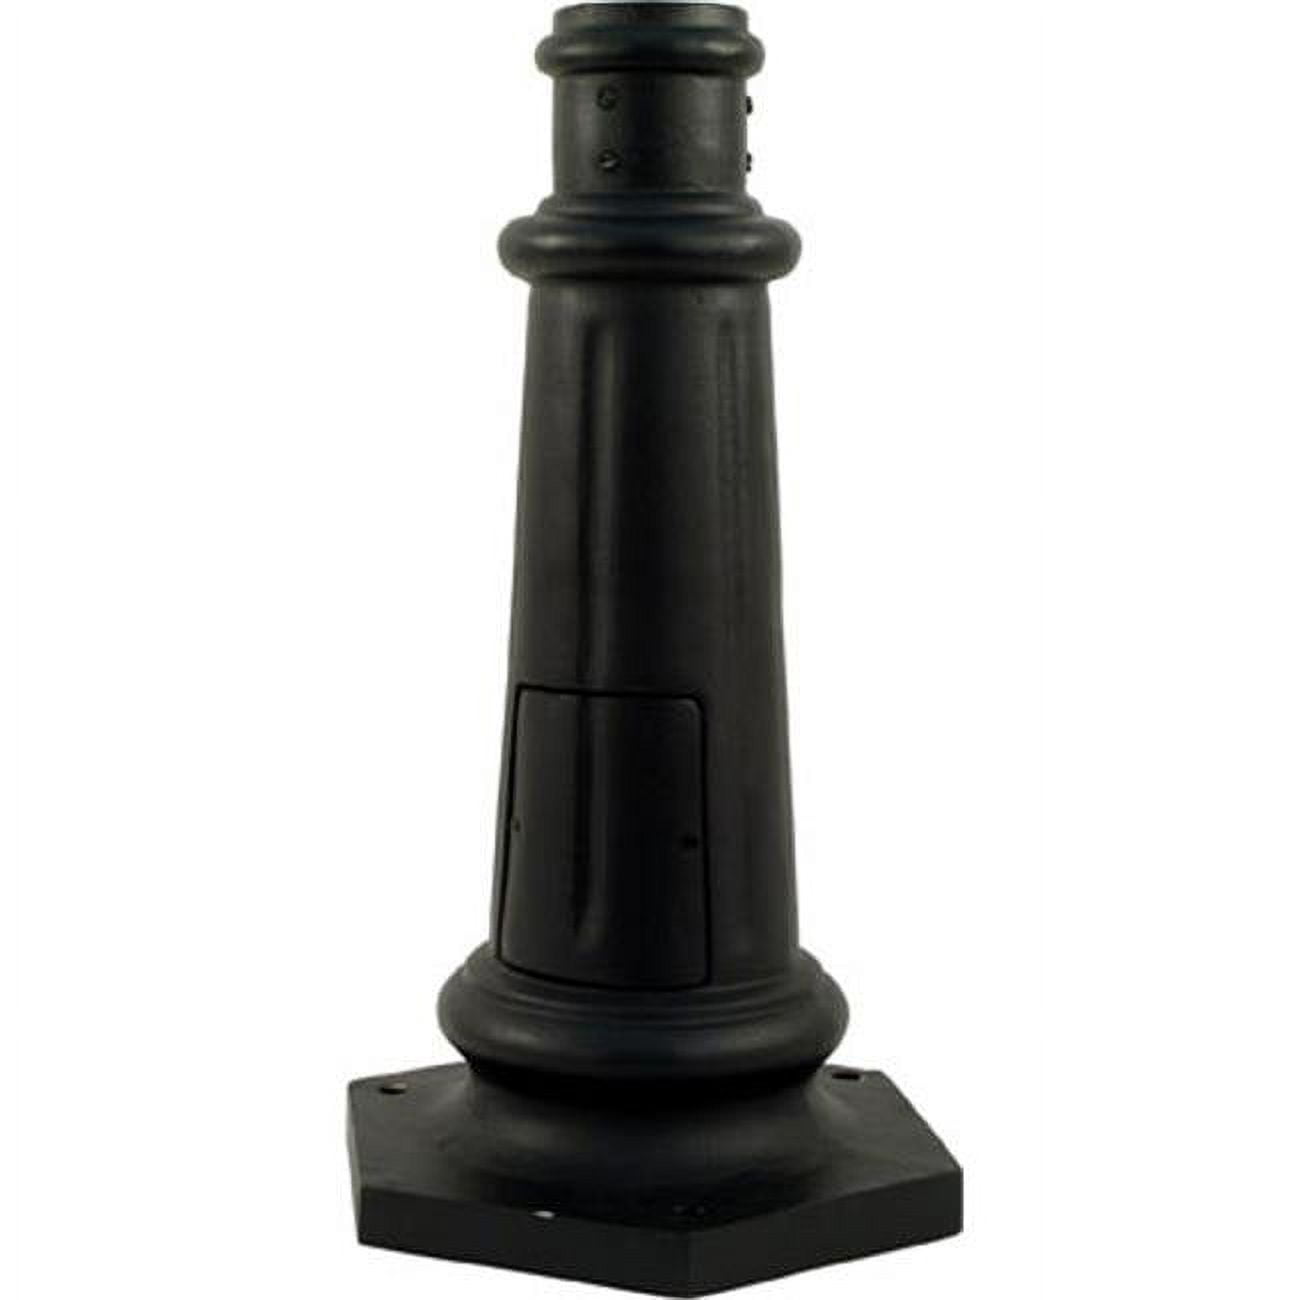 Bs350-b Surface Mounted Base For 3 In. Outer Dia Round Post, Black - 21.25 X 12.25 X 12.25 In.